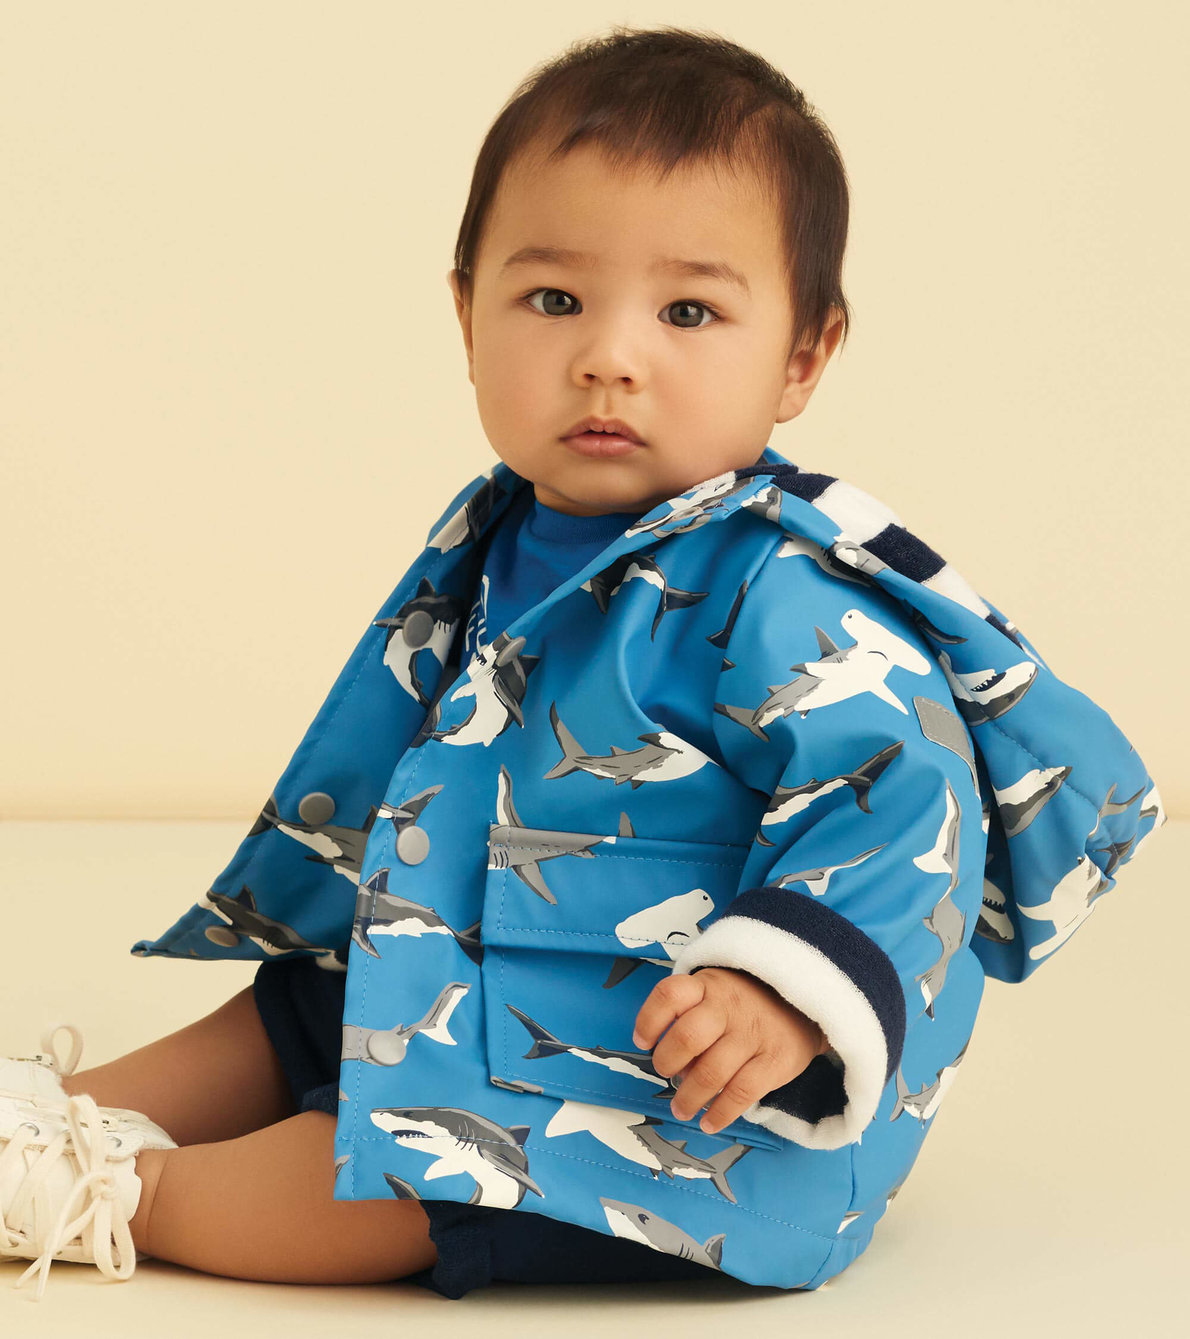 View larger image of Deep-Sea Sharks Colour Changing Baby Raincoat